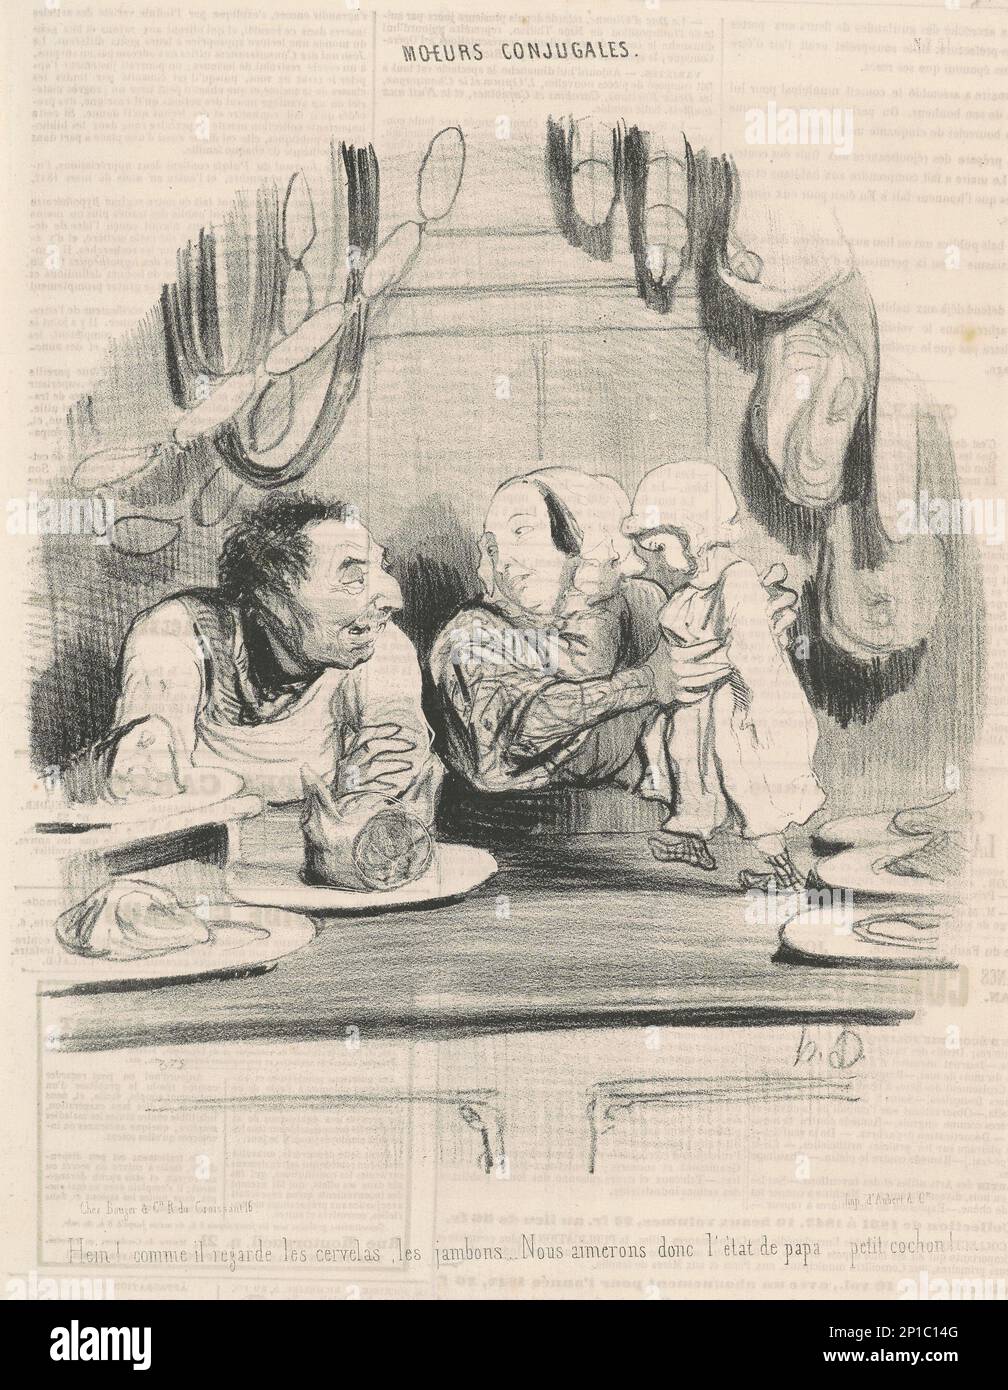 comme il regarde les cervelas..., 19th century.Conjugal morals - he looks at the saveloys Stock Photo